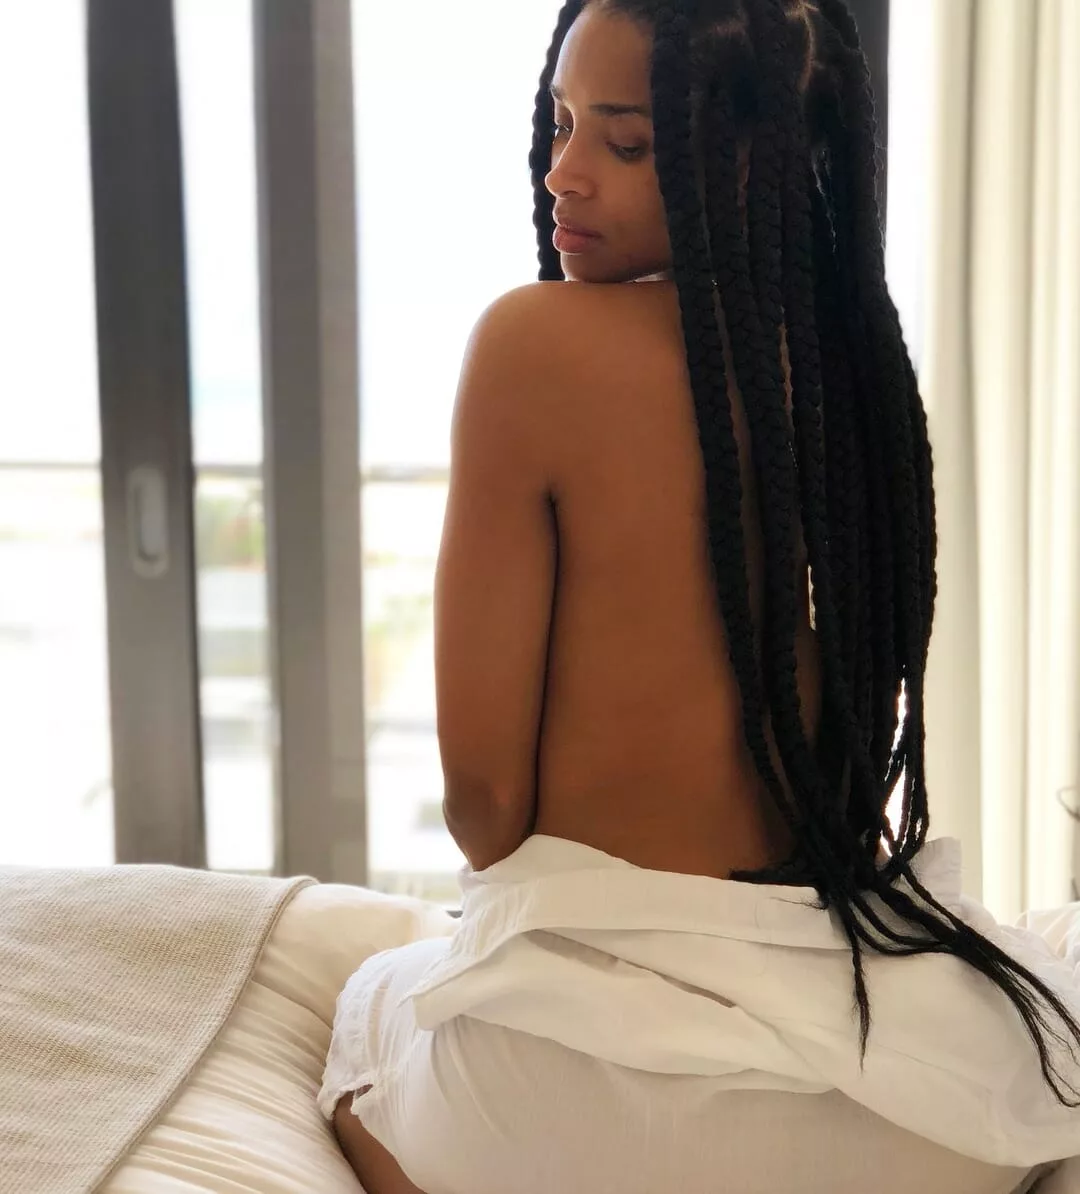 Ciara nude pic in bed